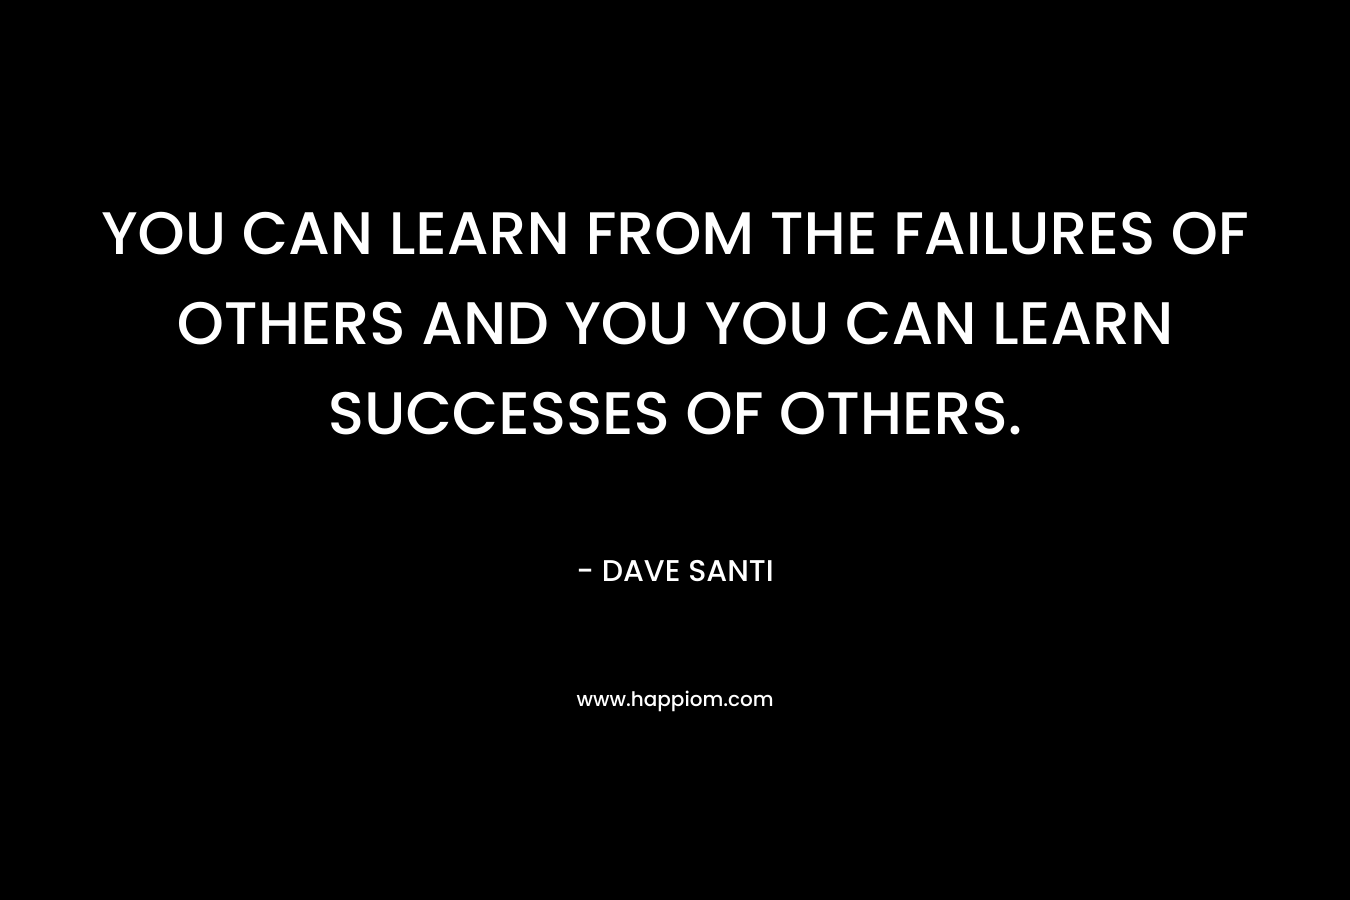 YOU CAN LEARN FROM THE FAILURES OF OTHERS AND YOU YOU CAN LEARN SUCCESSES OF OTHERS.